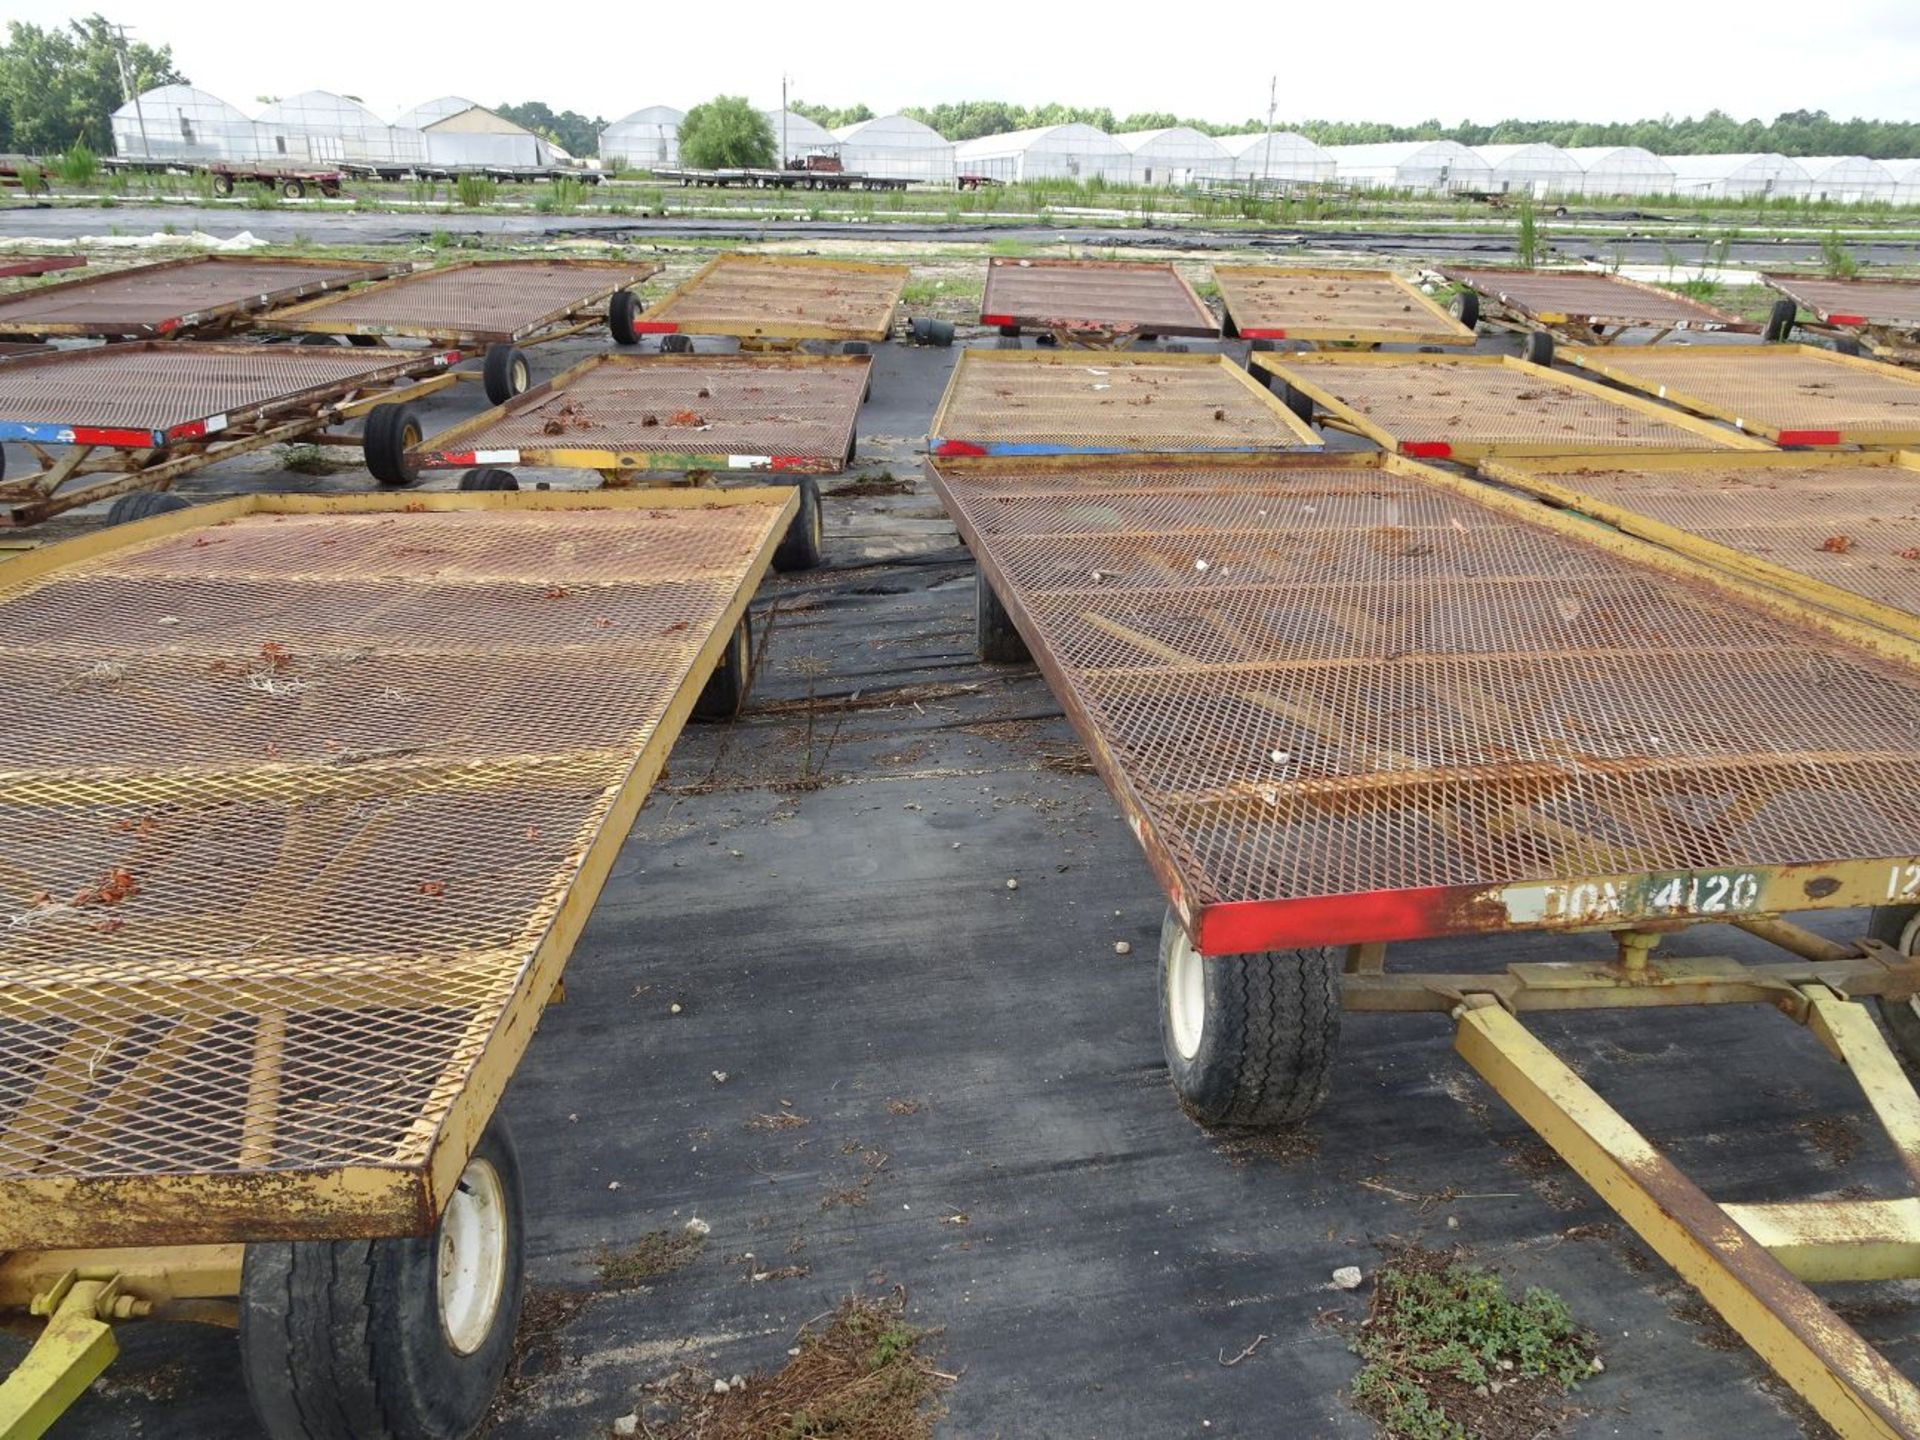 (6) SELF TRACKING TRAILERS, EACH IS PIN STYLE HITCH, EACH TRAILER BED IS 12' LONG x 6' WIDE (FOR - Image 2 of 3